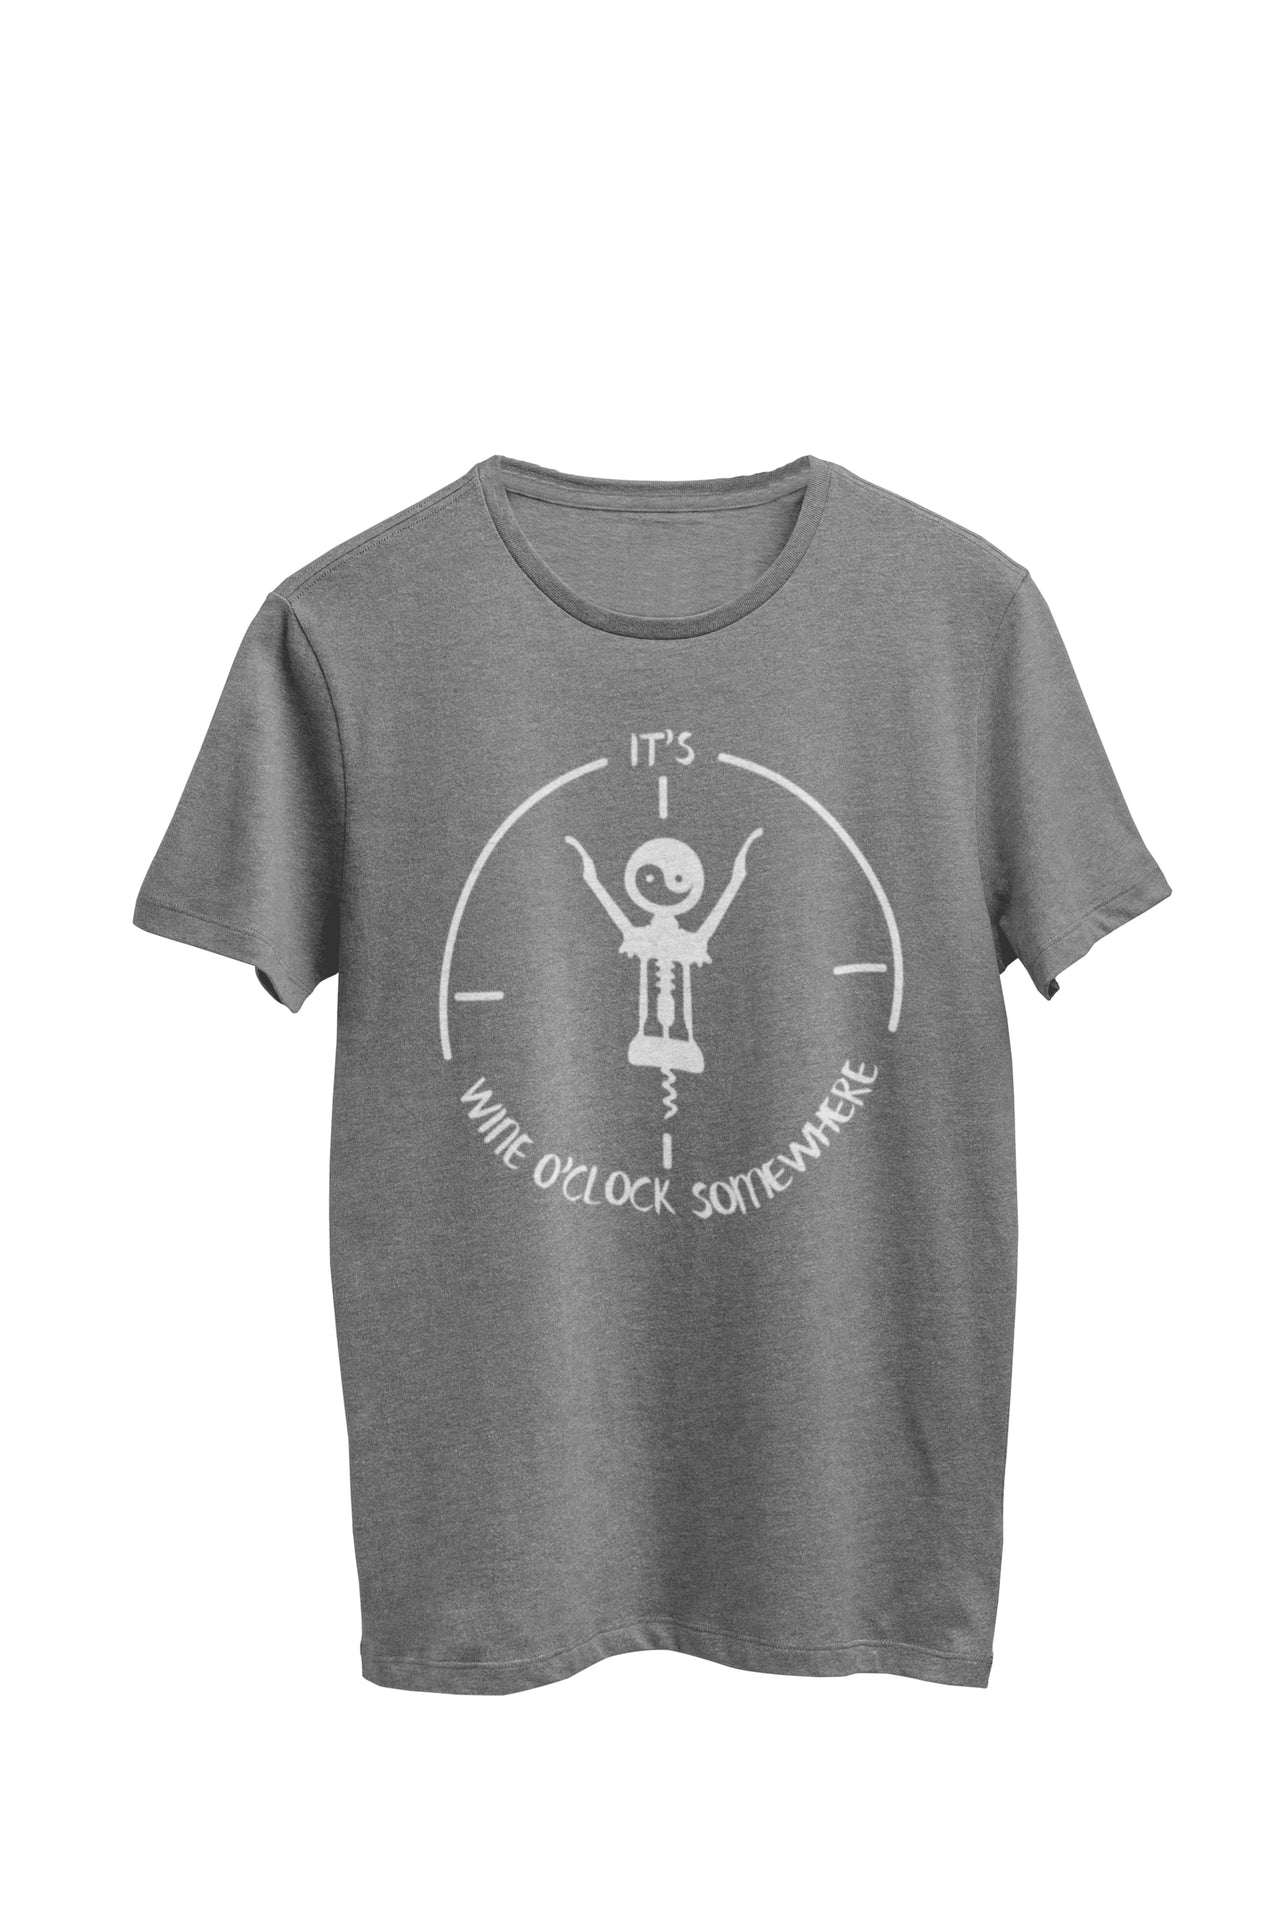 Gray Heather Unisex T-shirt featuring the text 'It's wine o'clock somewhere,' accompanied by an image of a wine cork as the hands of a clock, with a yin yang symbol on the face. Designed by WooHoo Apparel.